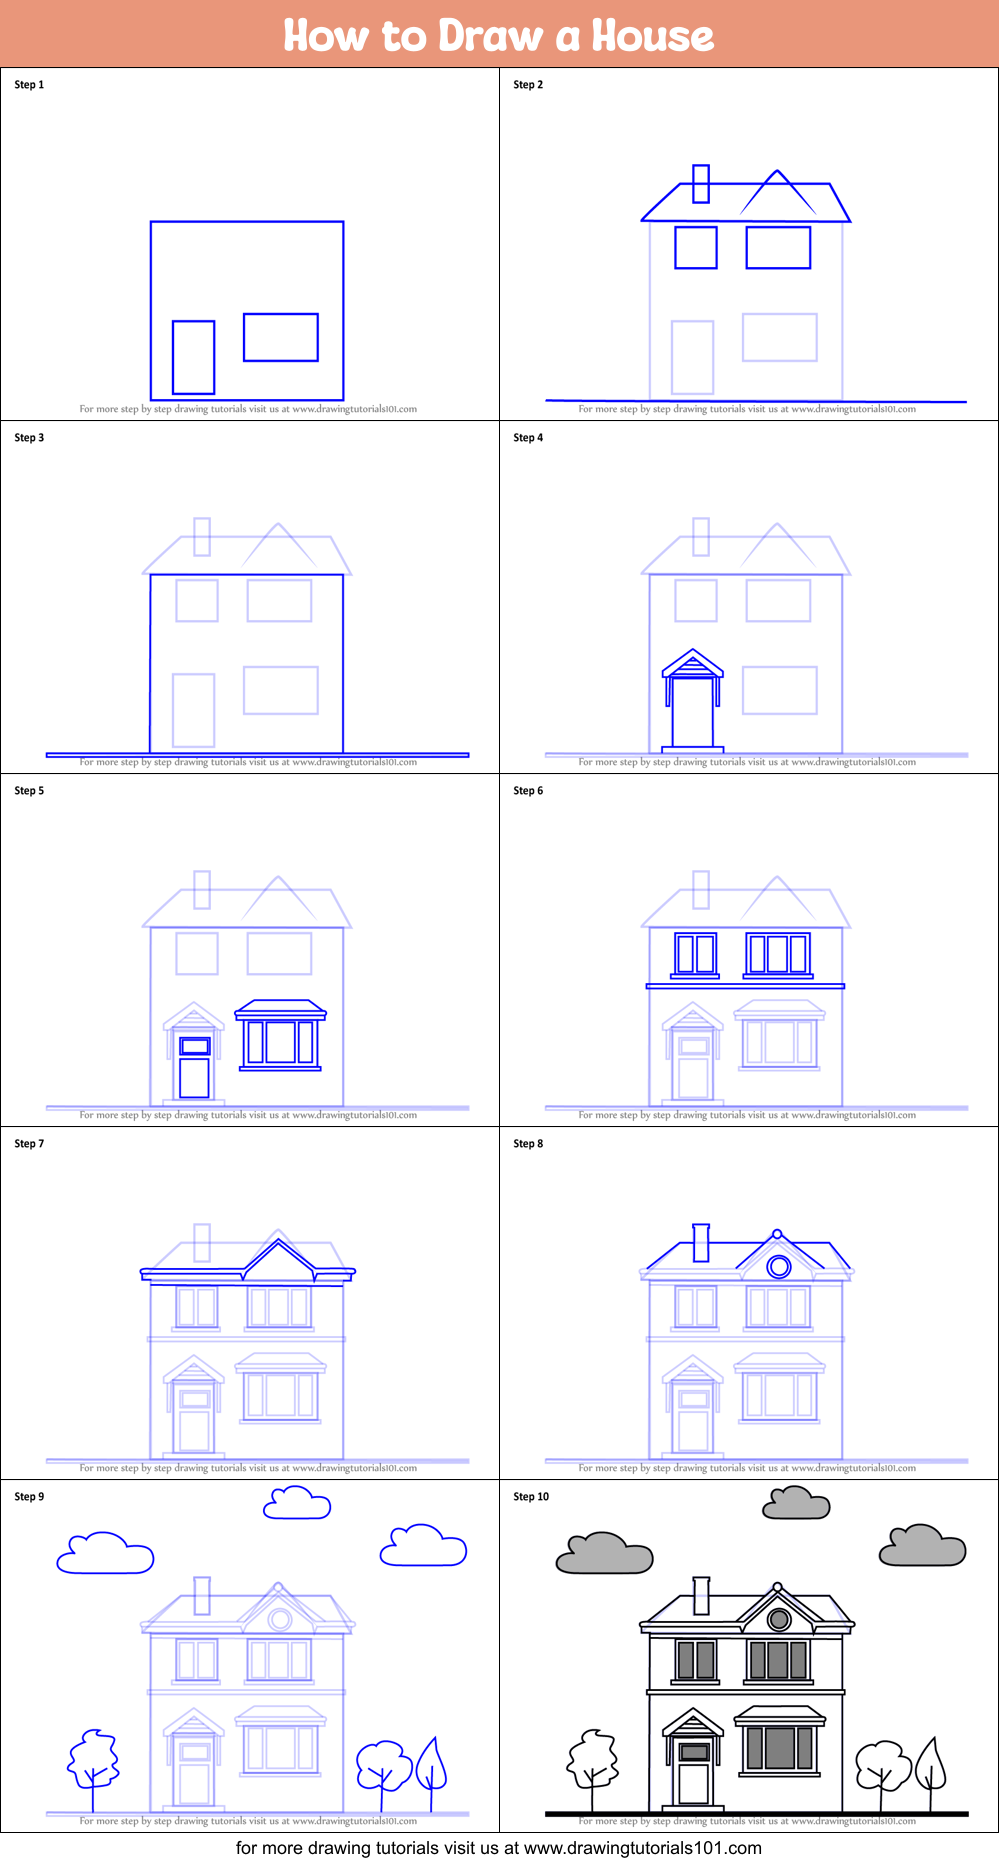 How to Draw a House printable step by step drawing sheet